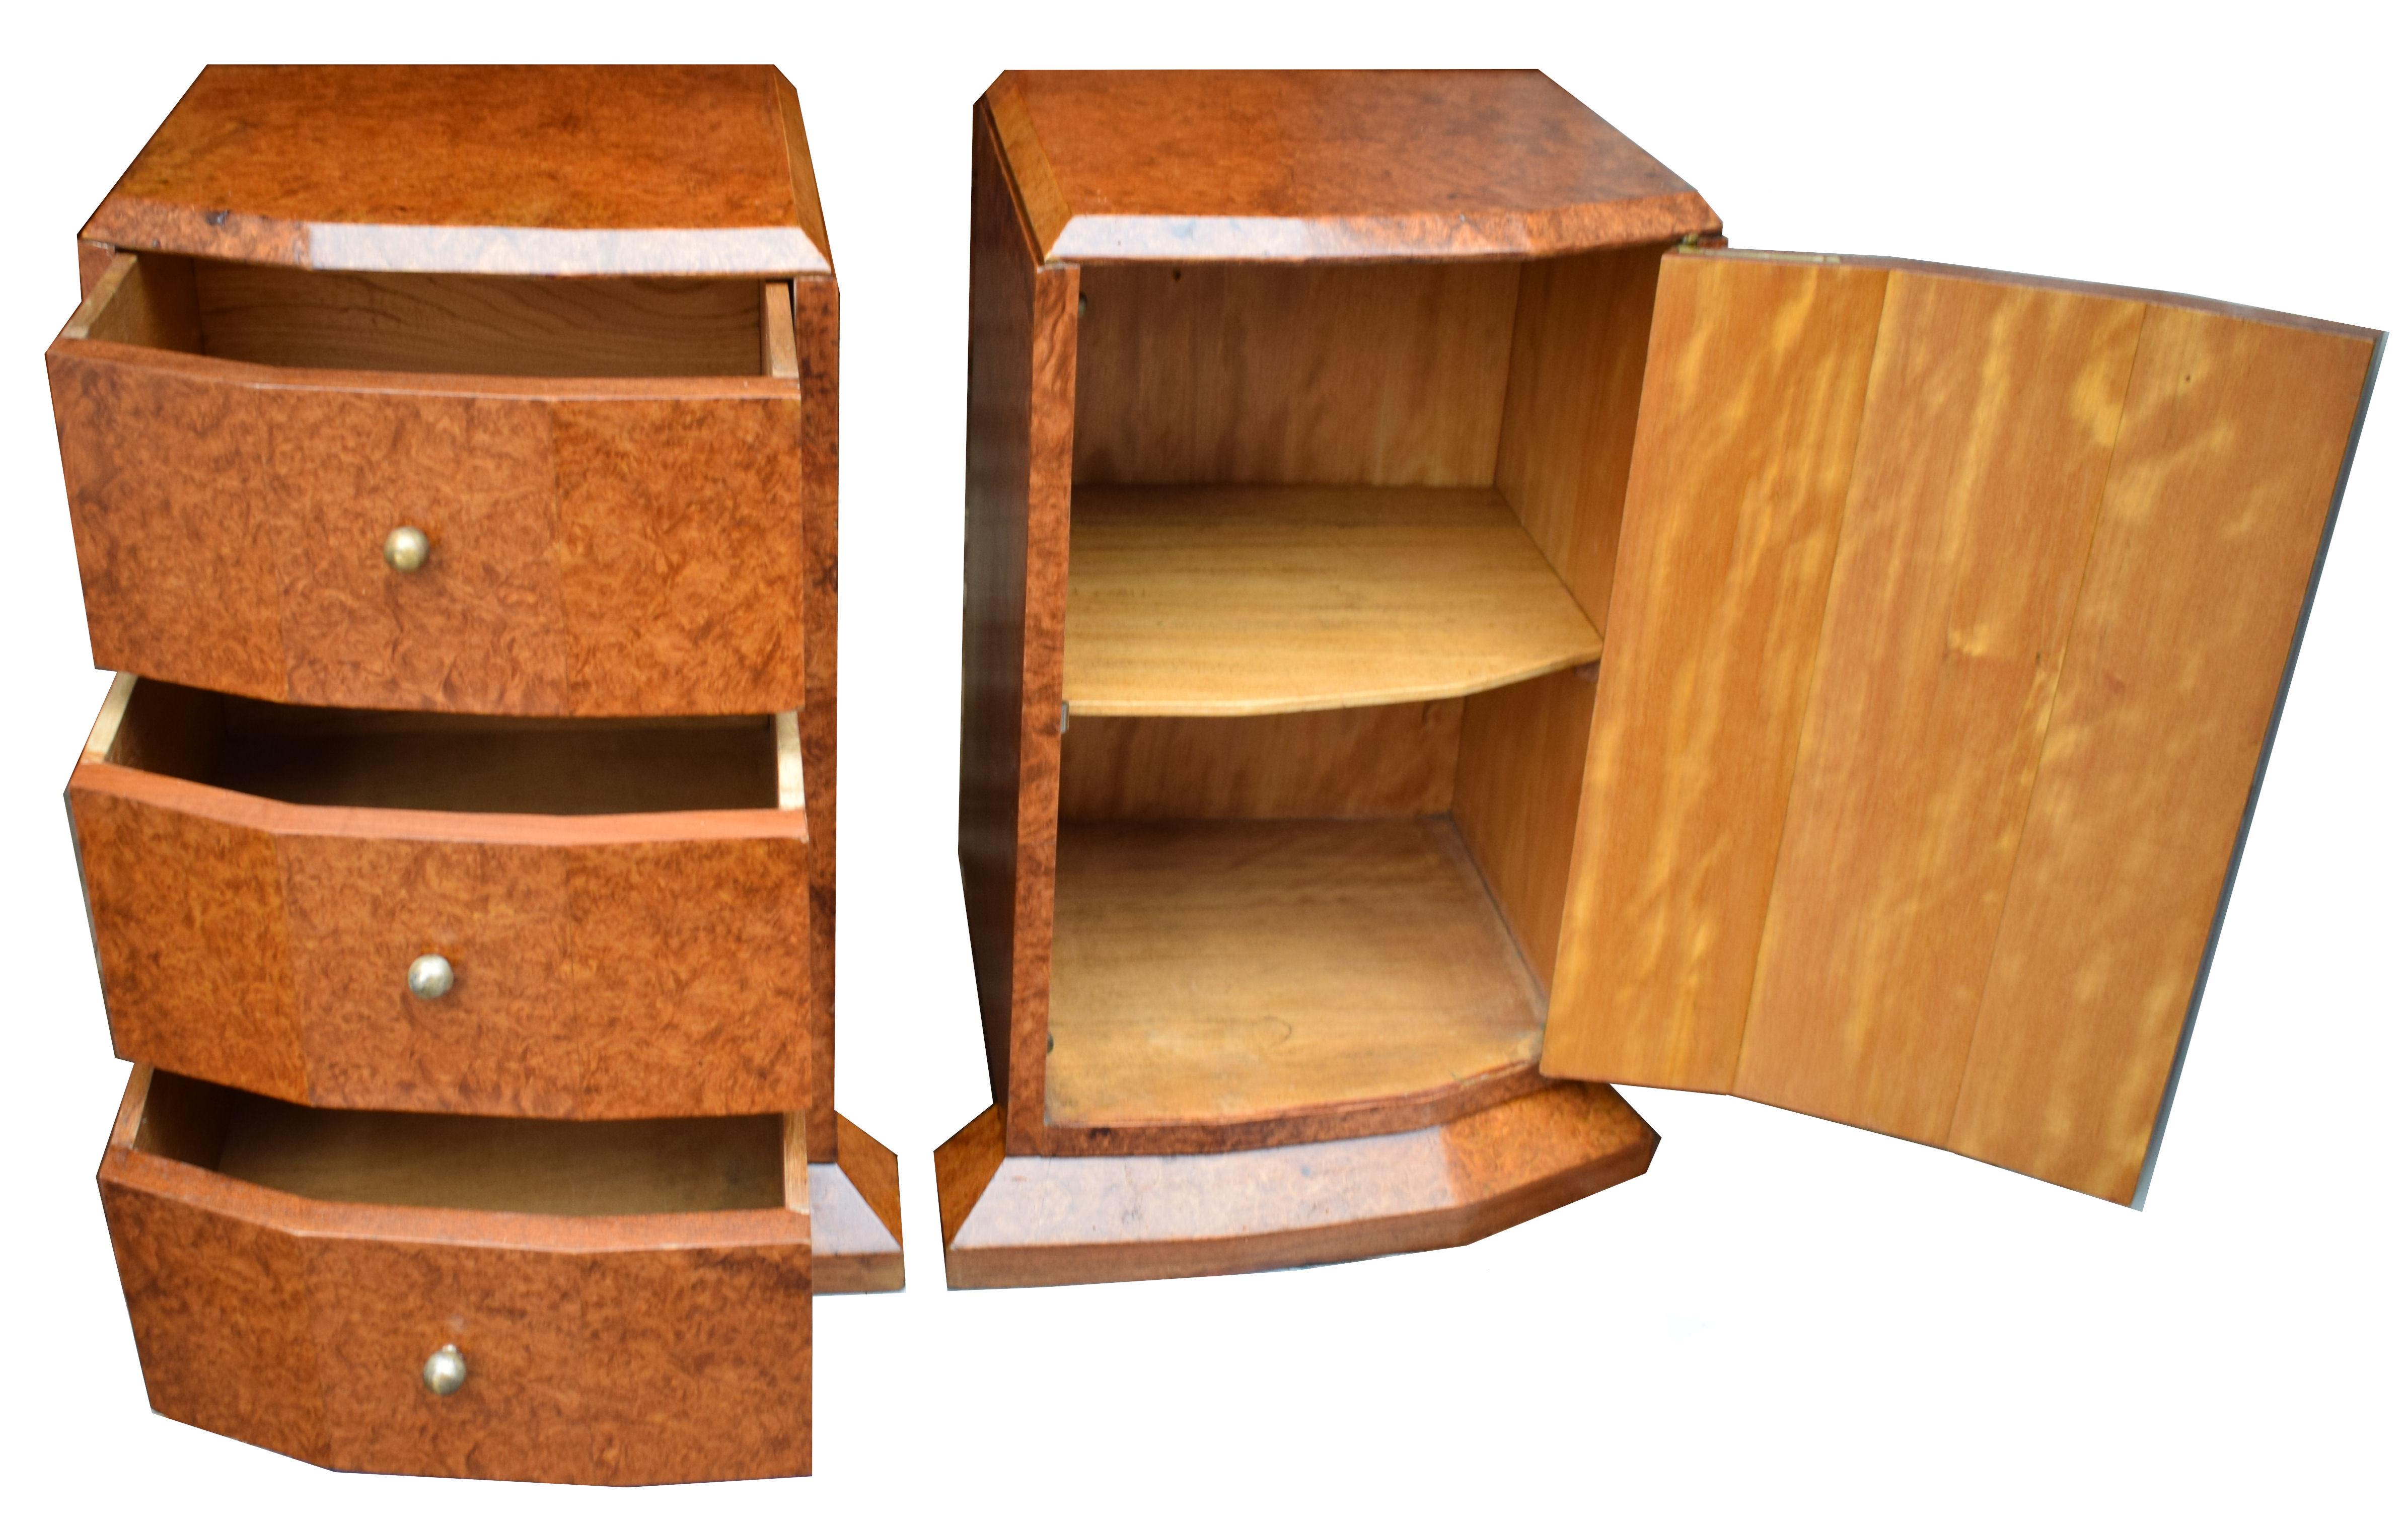 Fabulous pair of matching 1930s Art Deco bedside tables in heavily figured walnut veneers. His and hers bedside tables with one cabinet which has fake frontage drawers opening to reveal a generously sized shelved cupboard and the second cabinet is